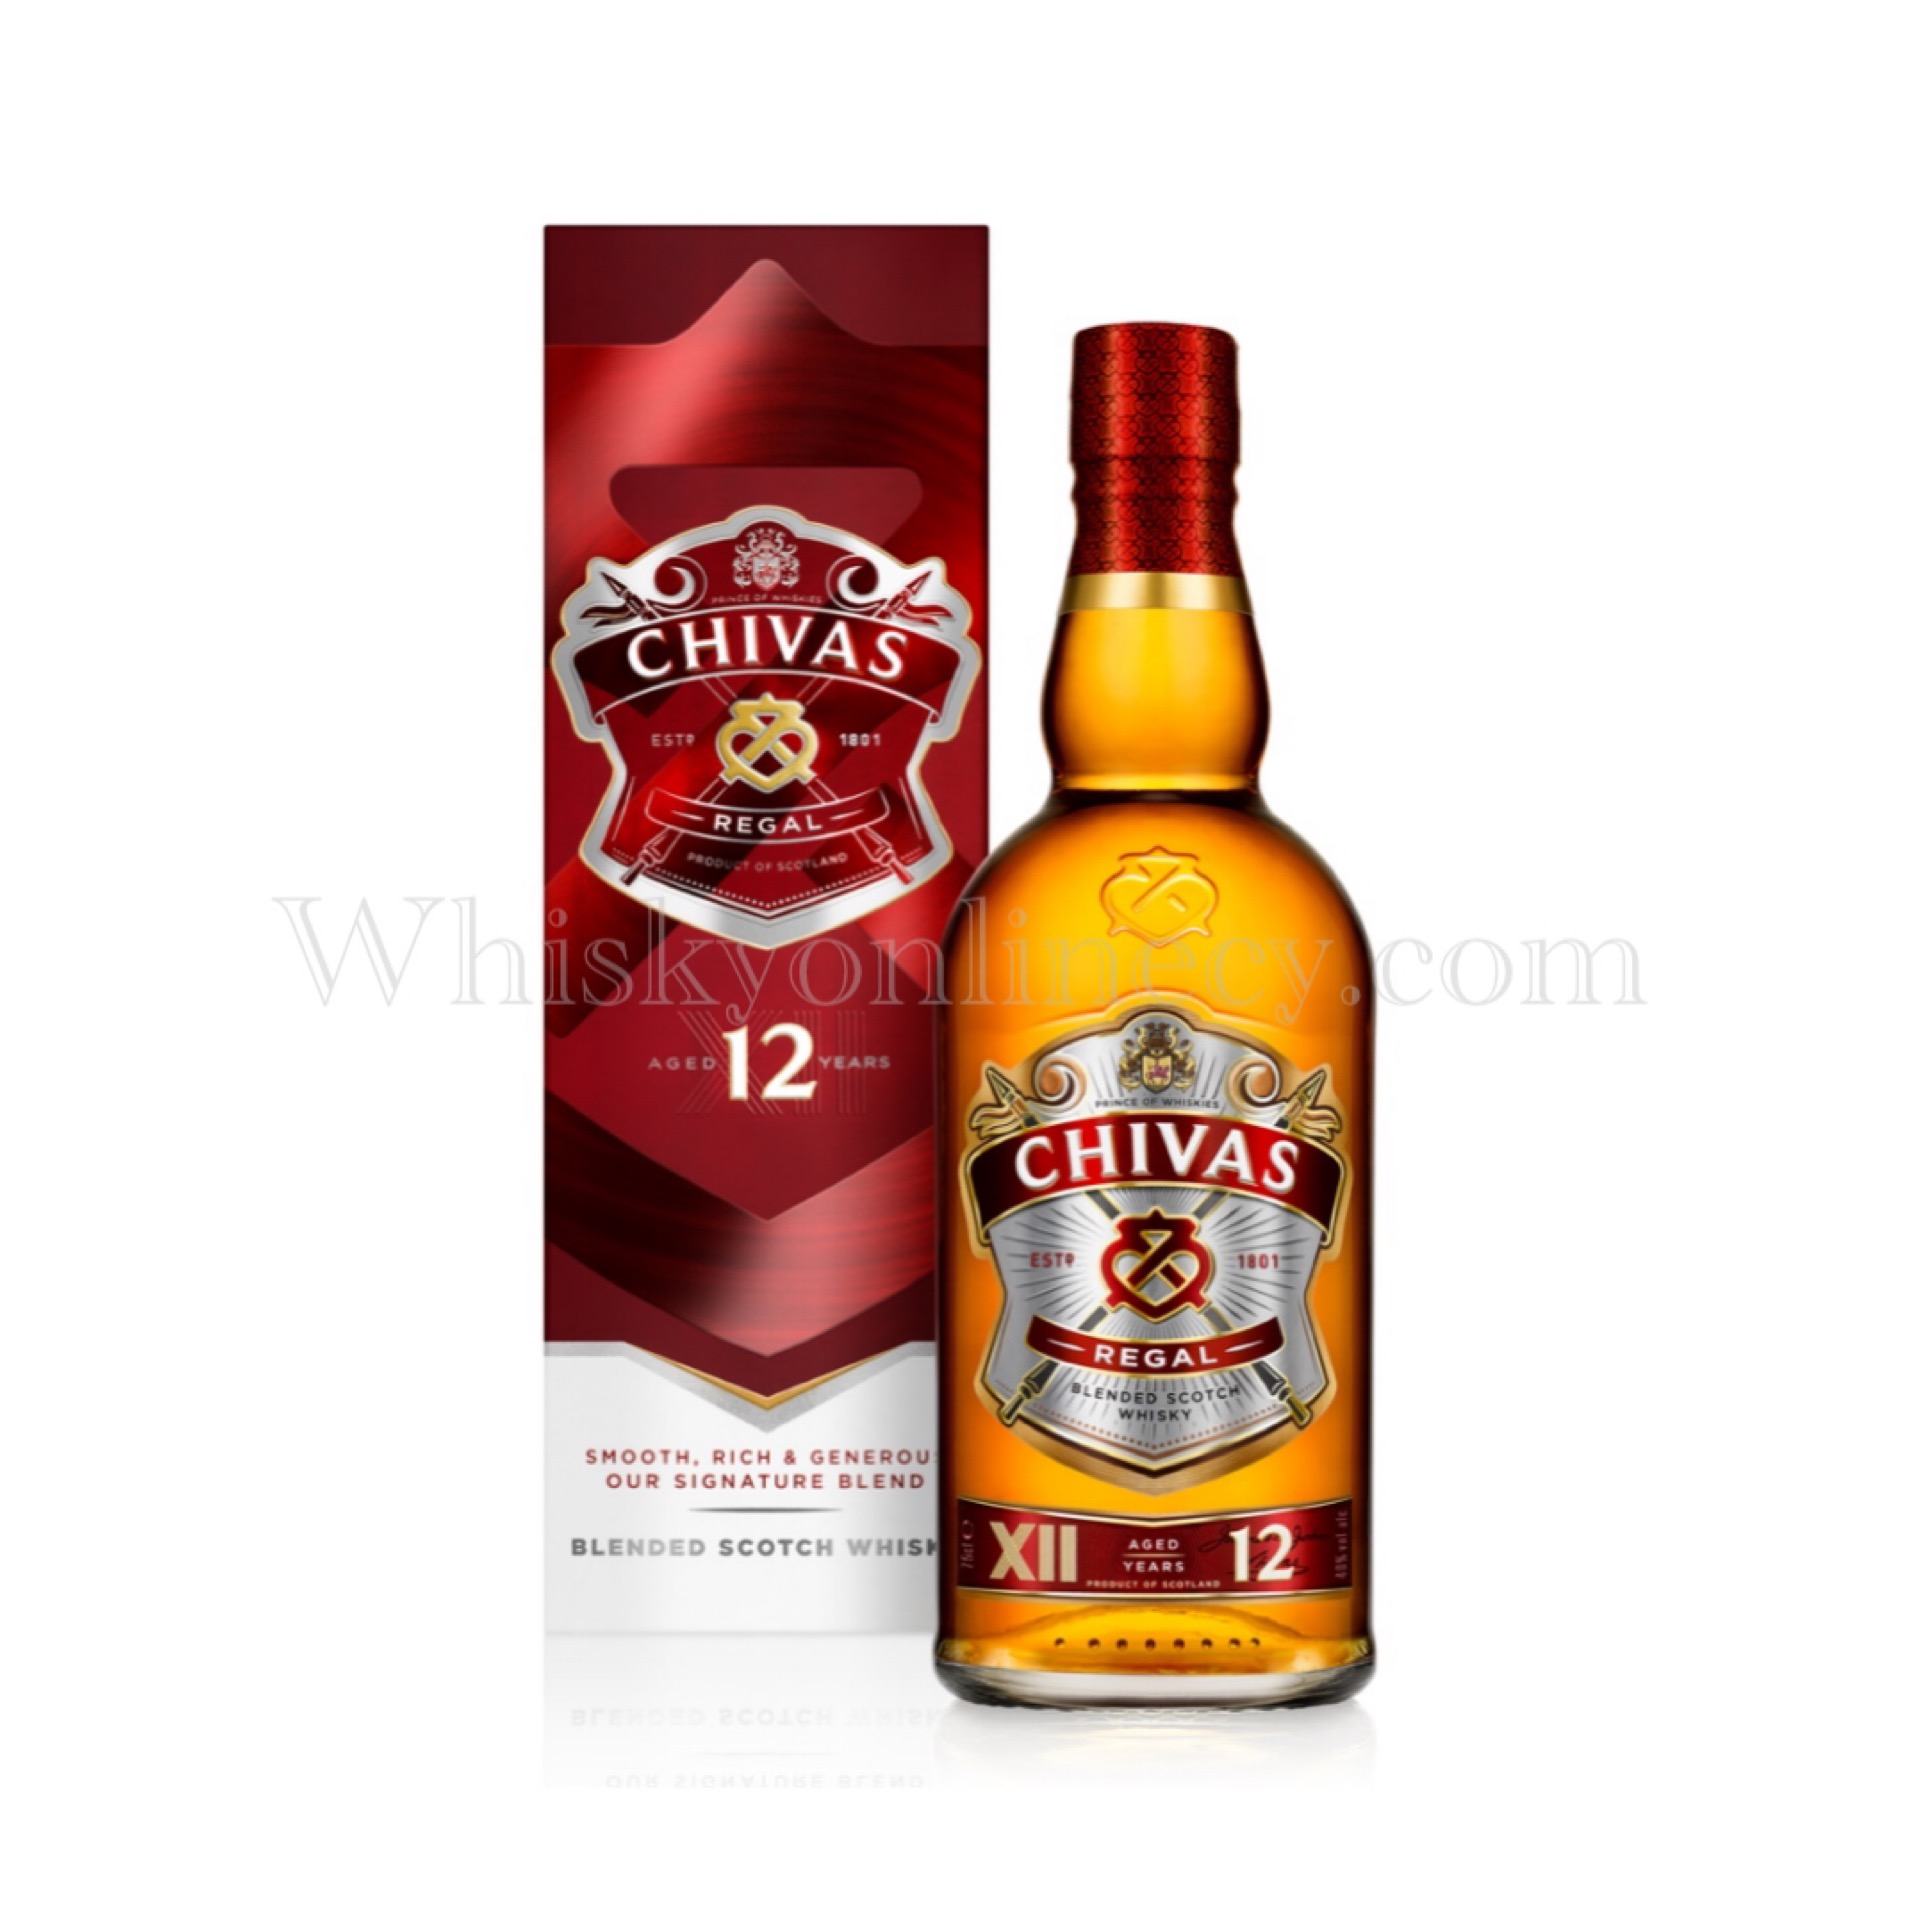 Whisky Review & Tasting Notes: Chivas Regal 12 year old 40%